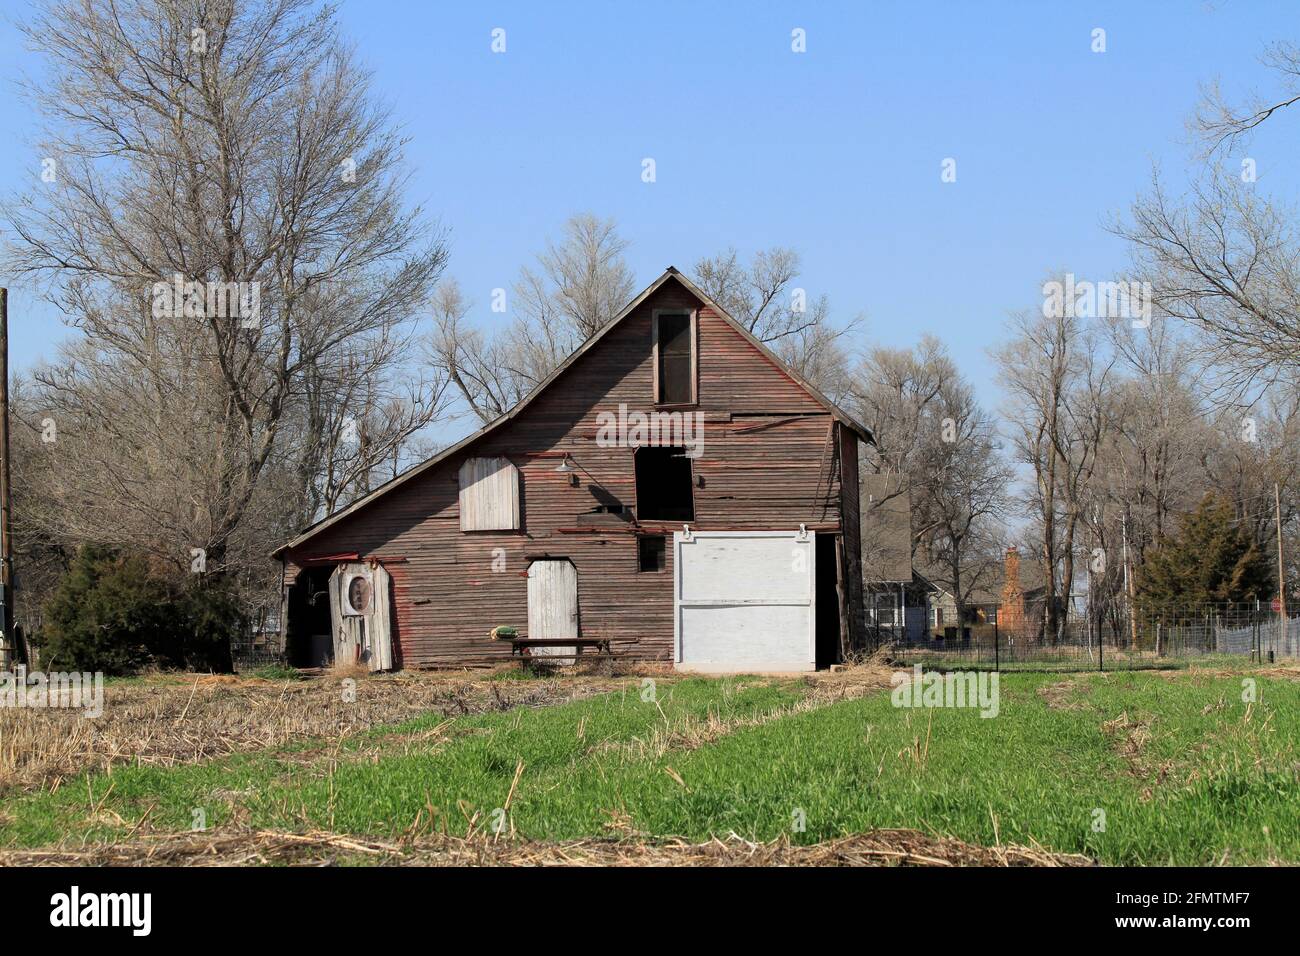 Kansas wooden barn with grass, tree's and blue sky on a colorful day. Stock Photo